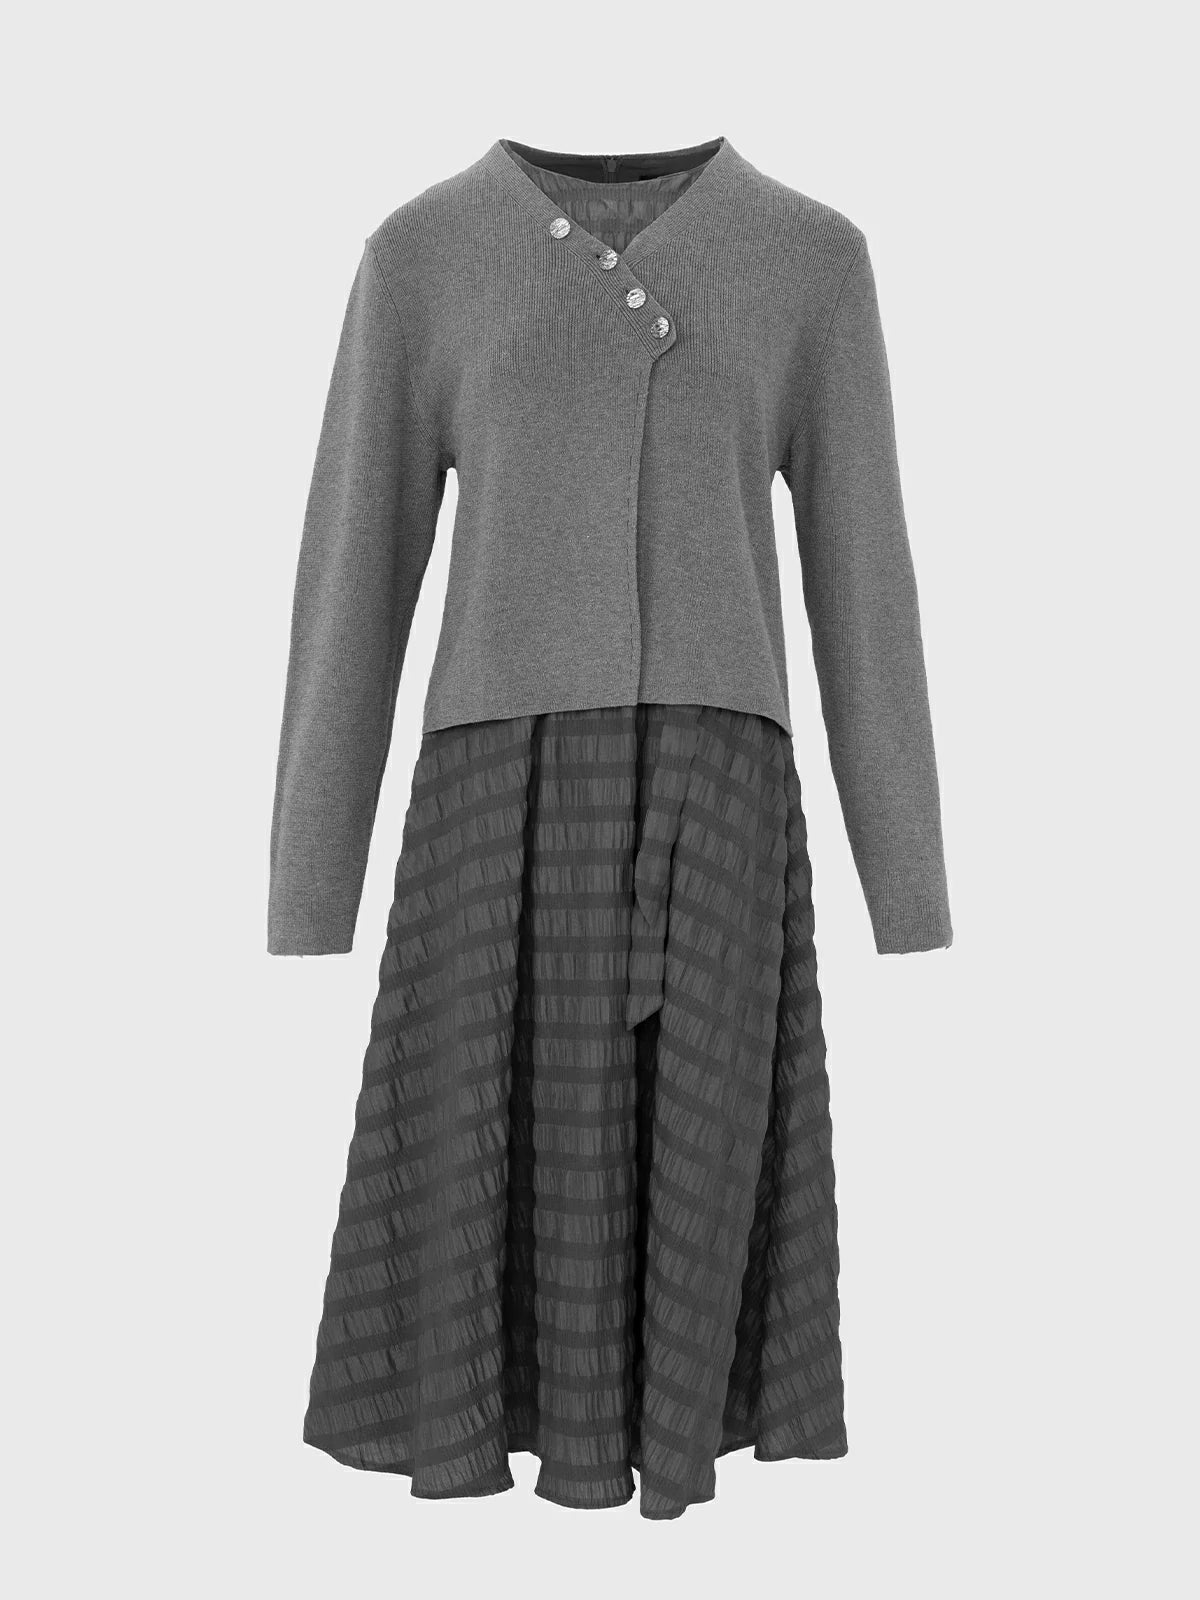 Define your fashion statement with this distinctive two-piece set, highlighting an irregular buttoned cardigan and a sleeveless A-line dress featuring a striped texture.